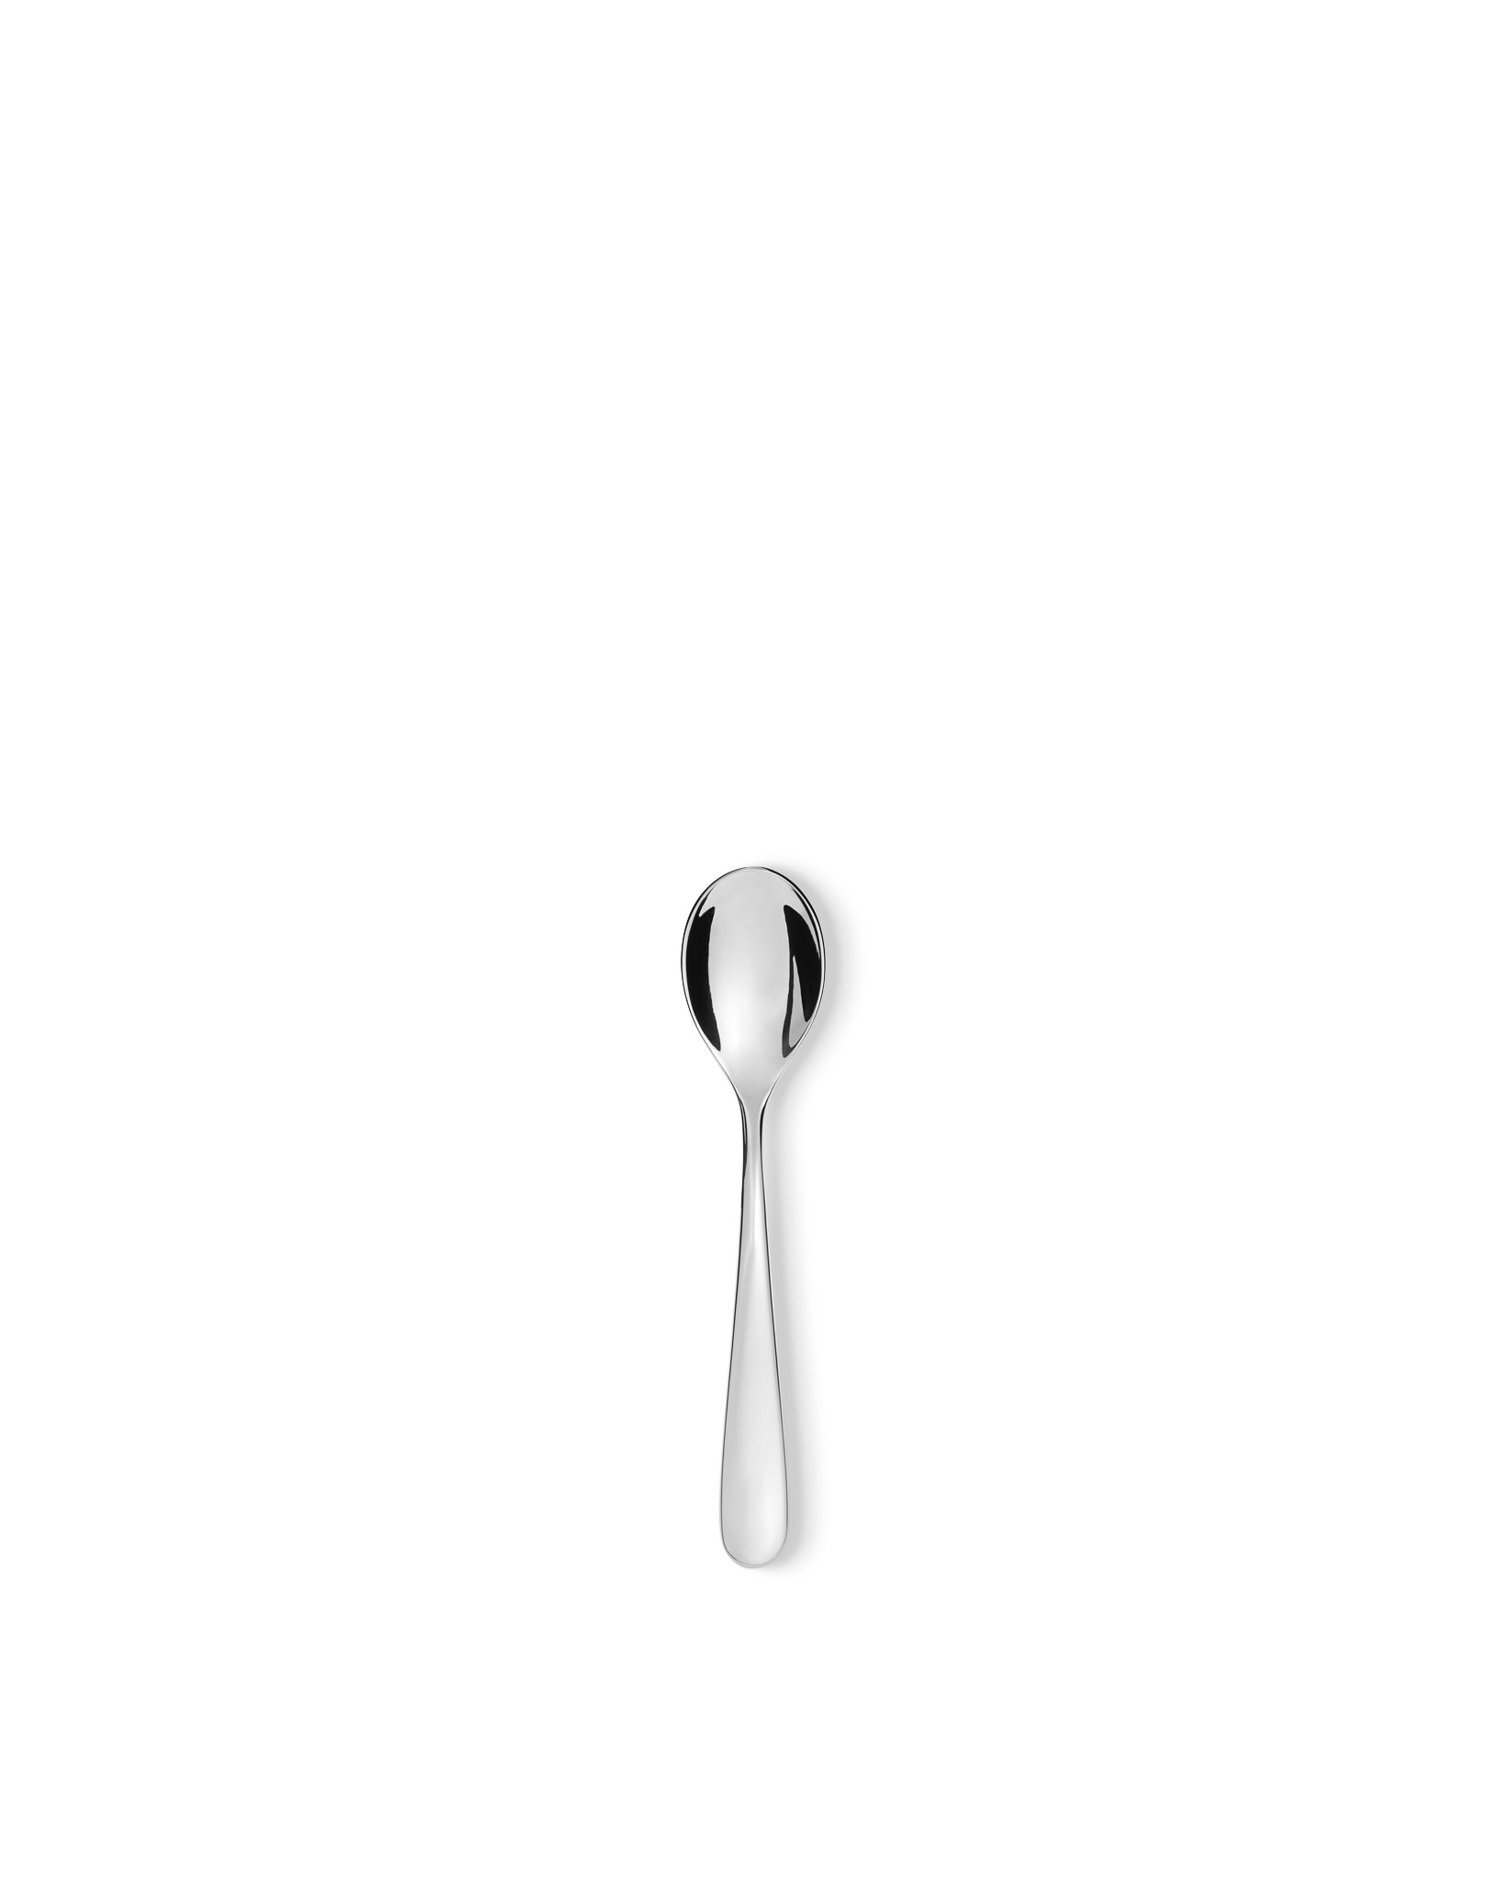 New Alessi Nuovo Milano Stainless Steel Teaspoon in Original Box  #7639 